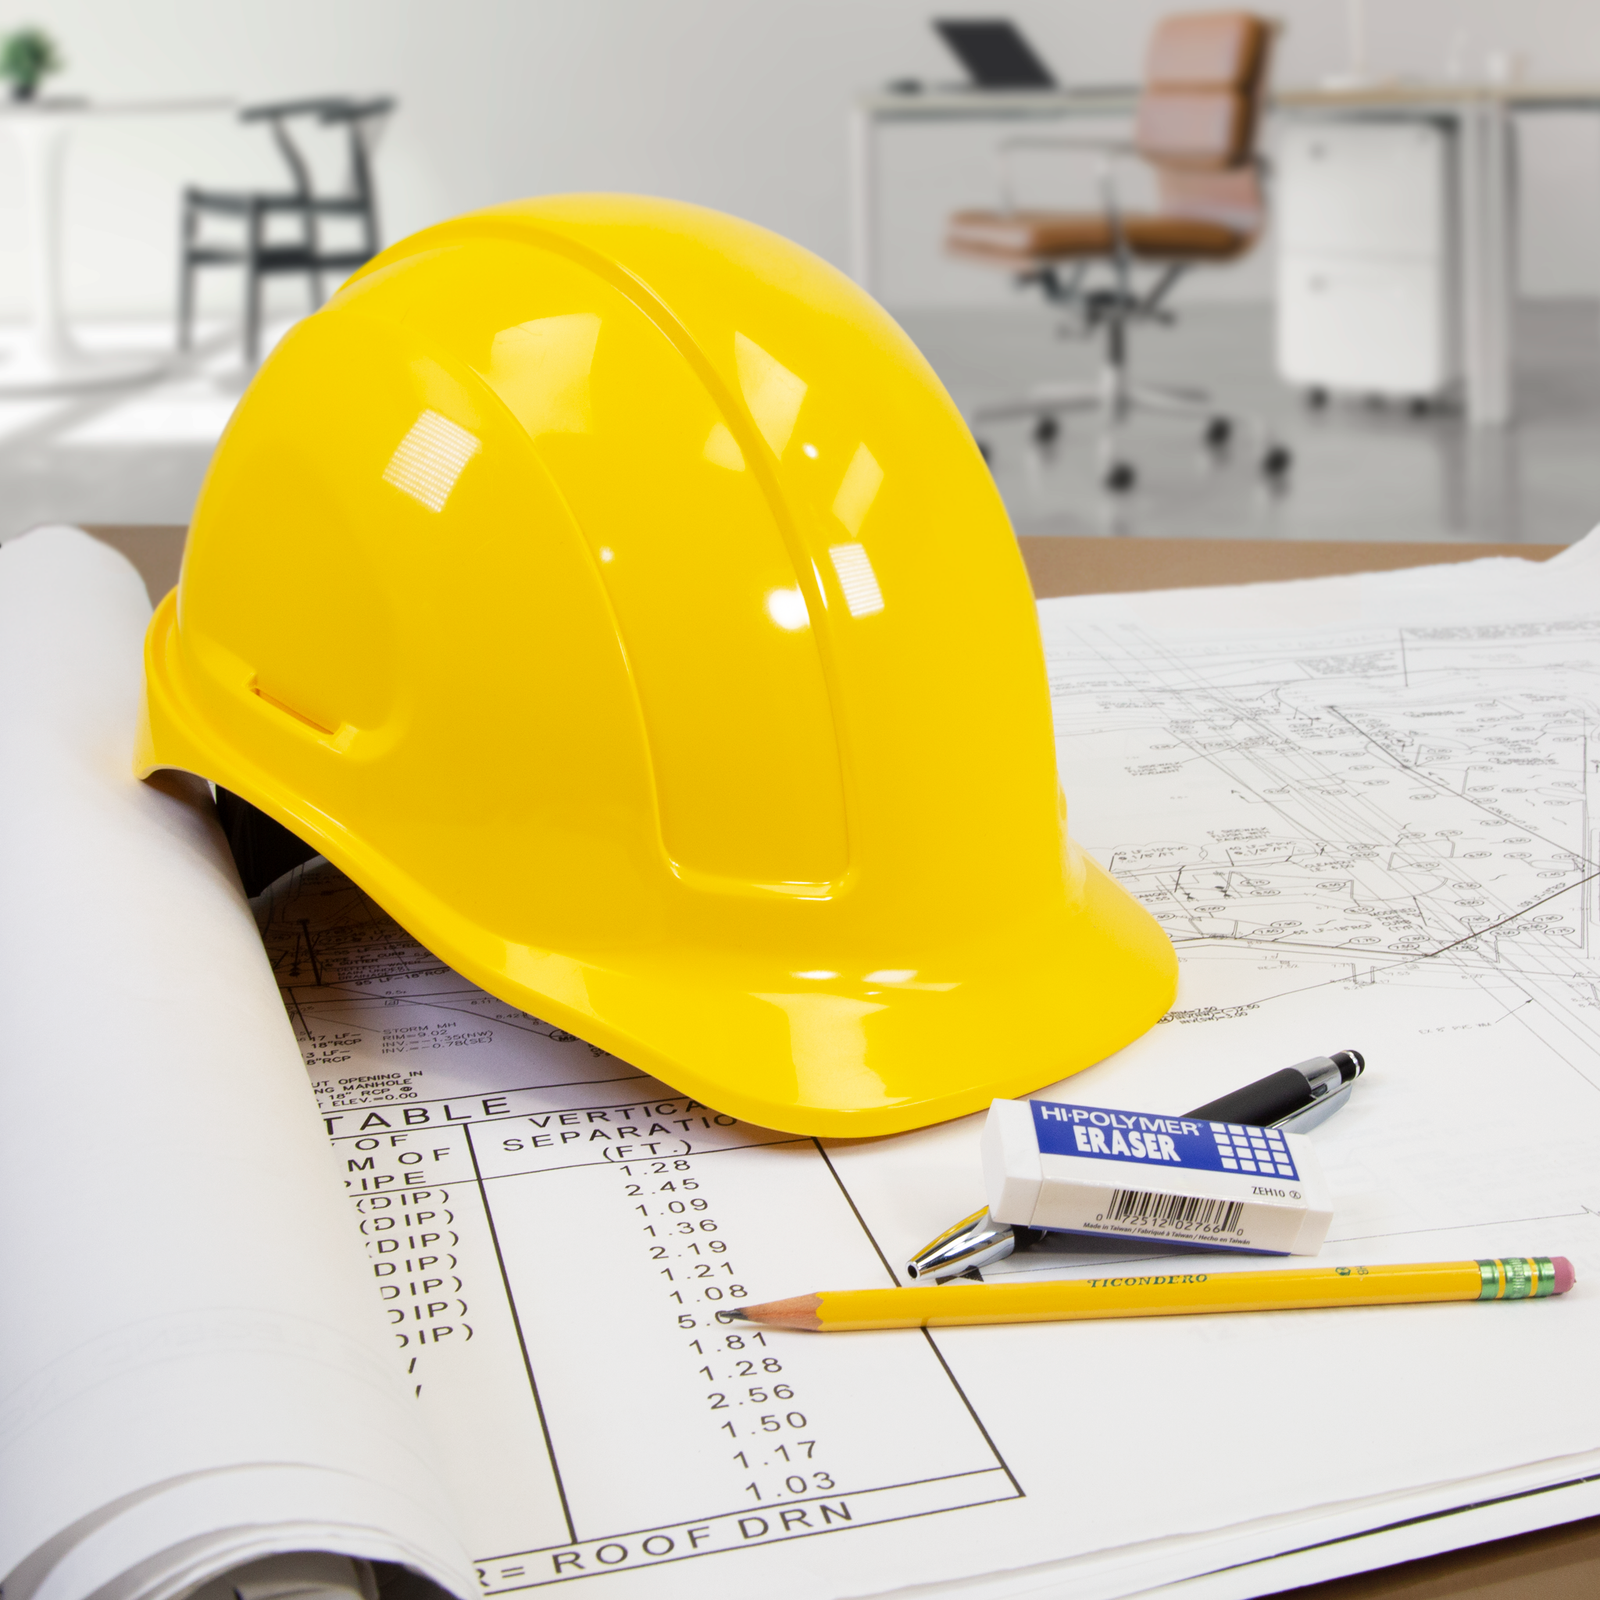 Features an office and a detailed shot of the yellow jorestech cap style hard hat on a table over some blueprints